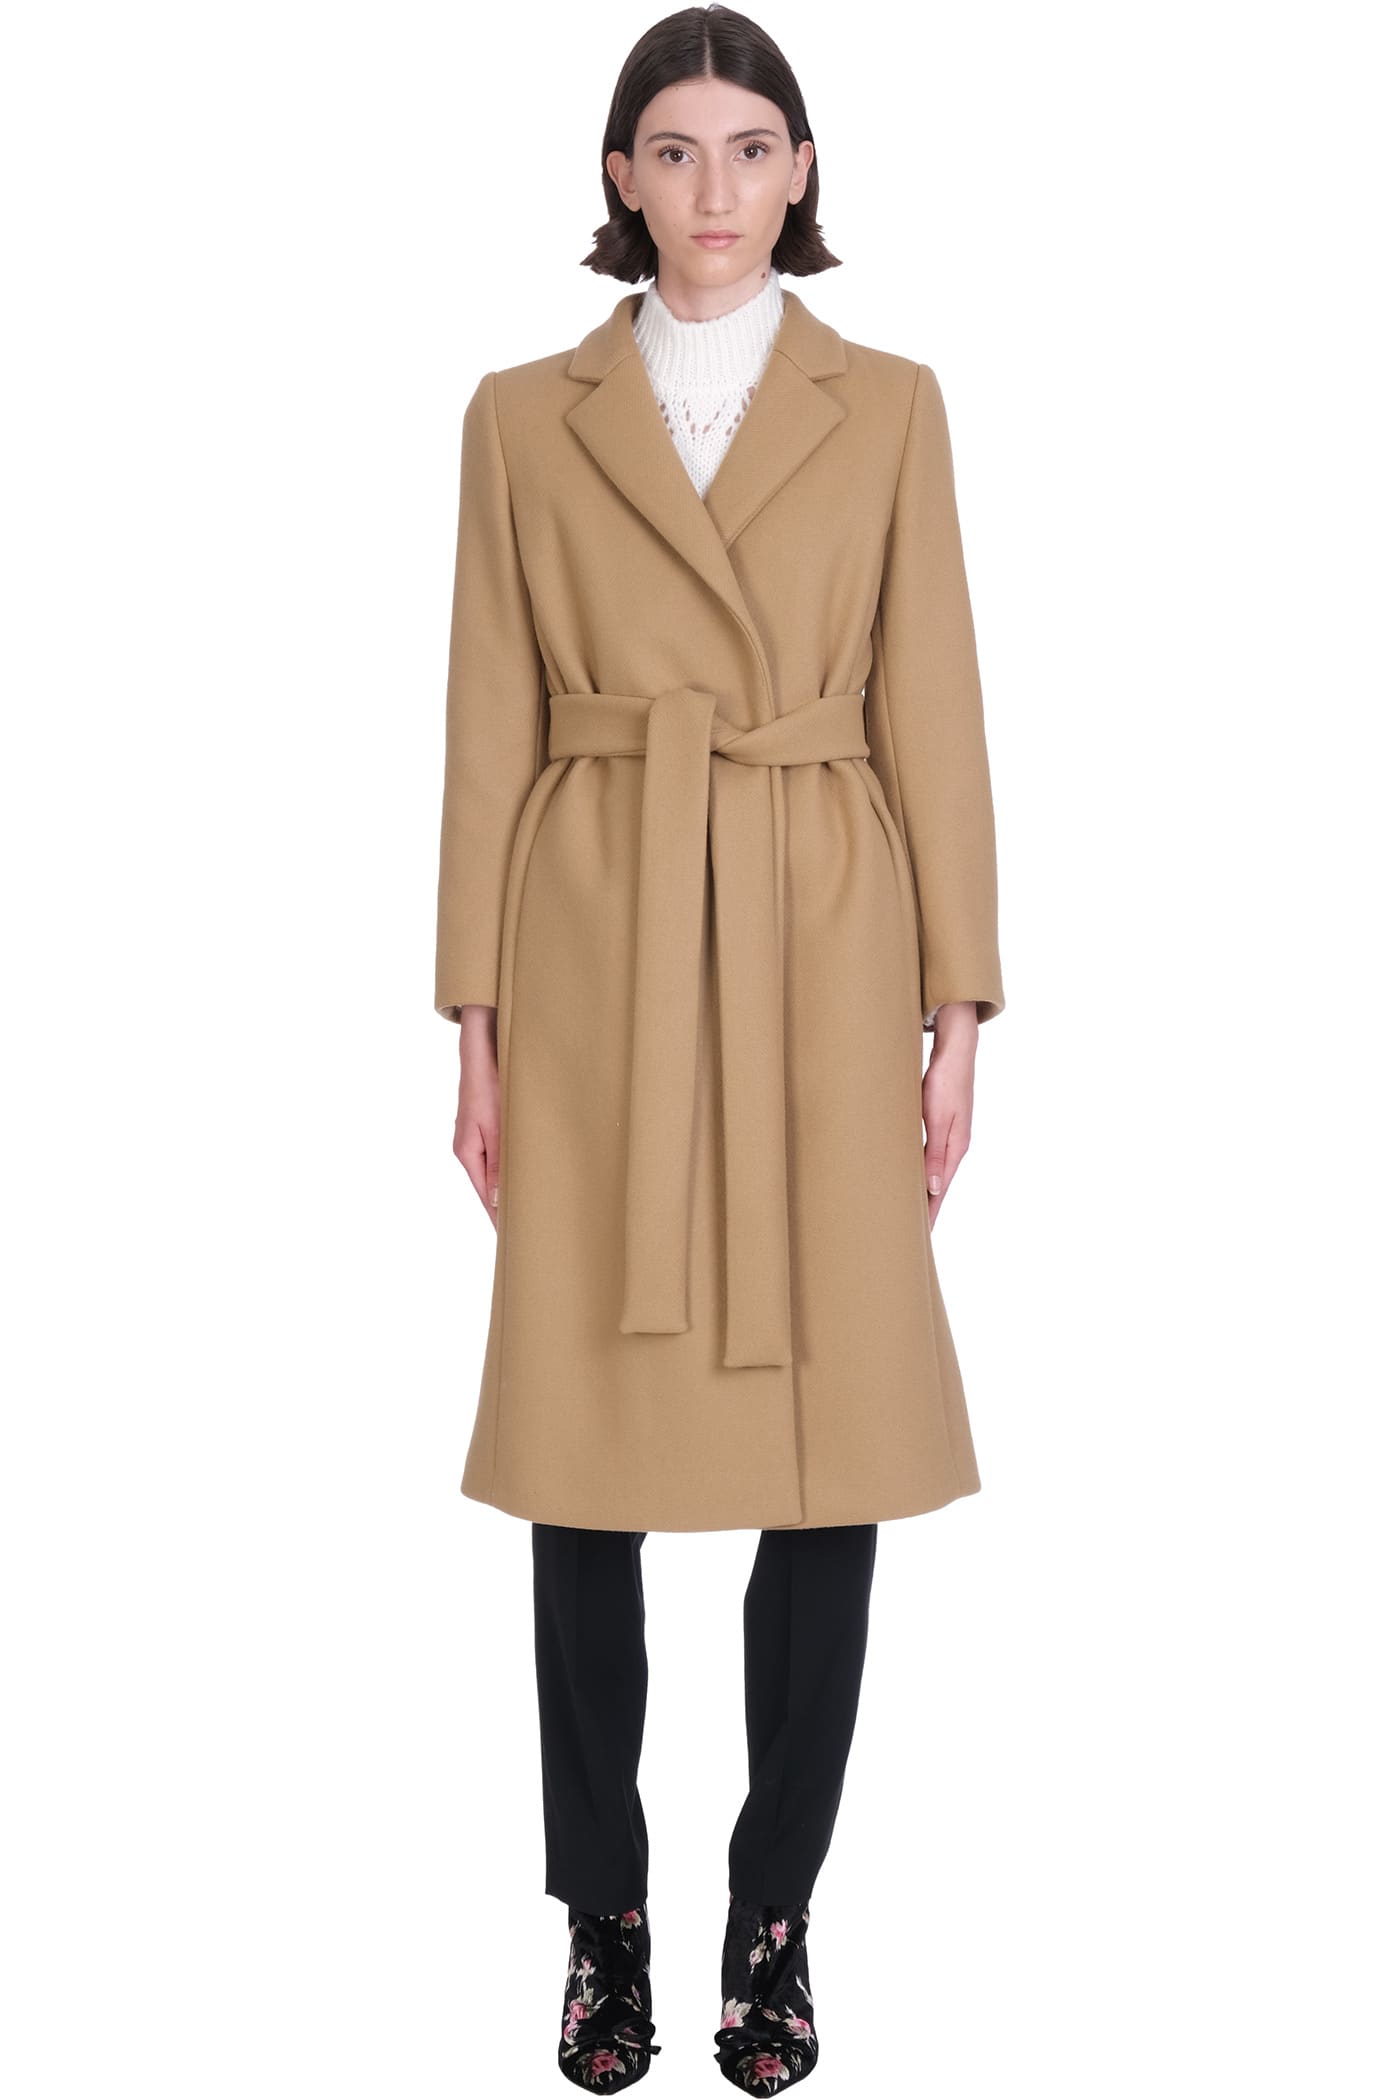 RED Valentino Coat In Camel Wool